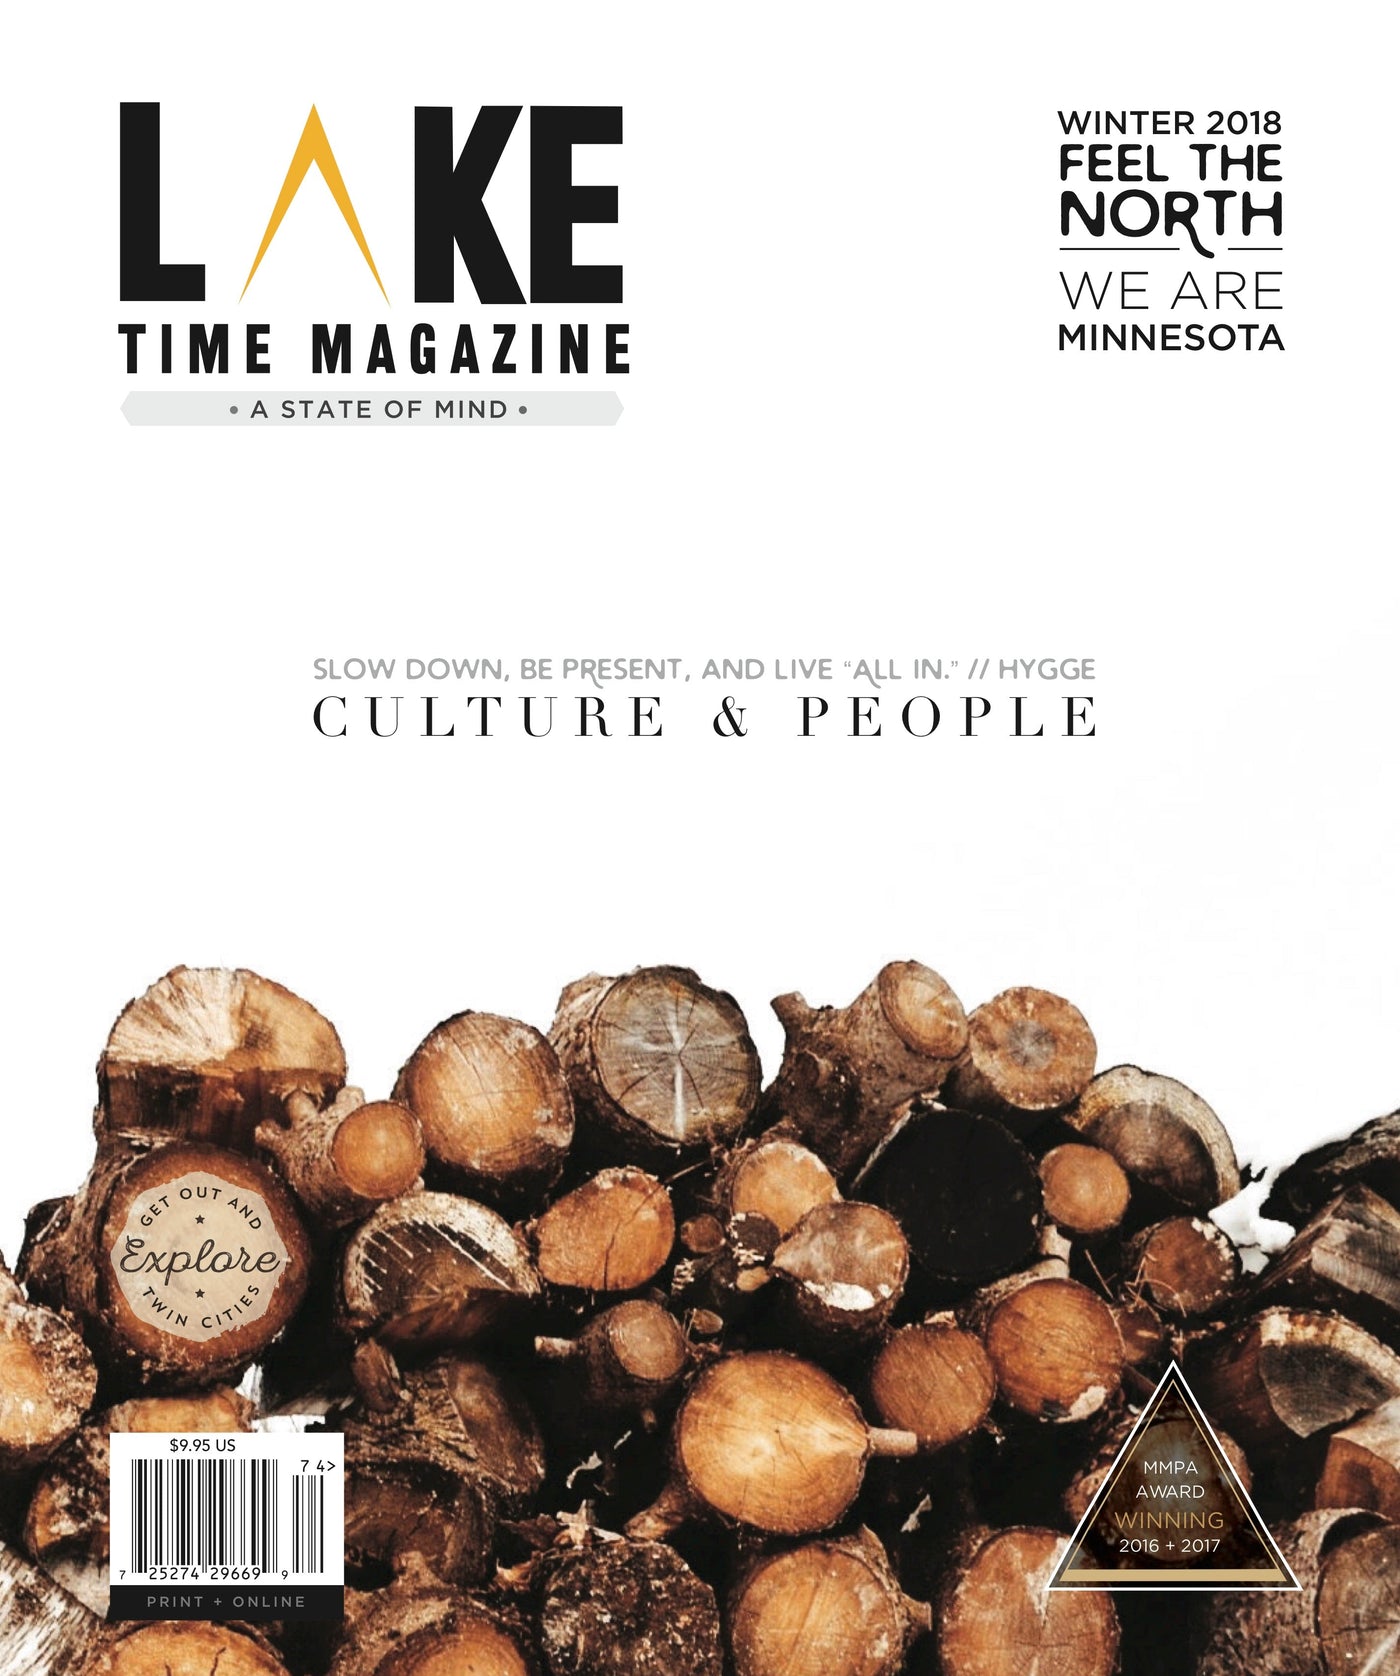 Lake Time Magazine: Issue 10 - The Lake and Company